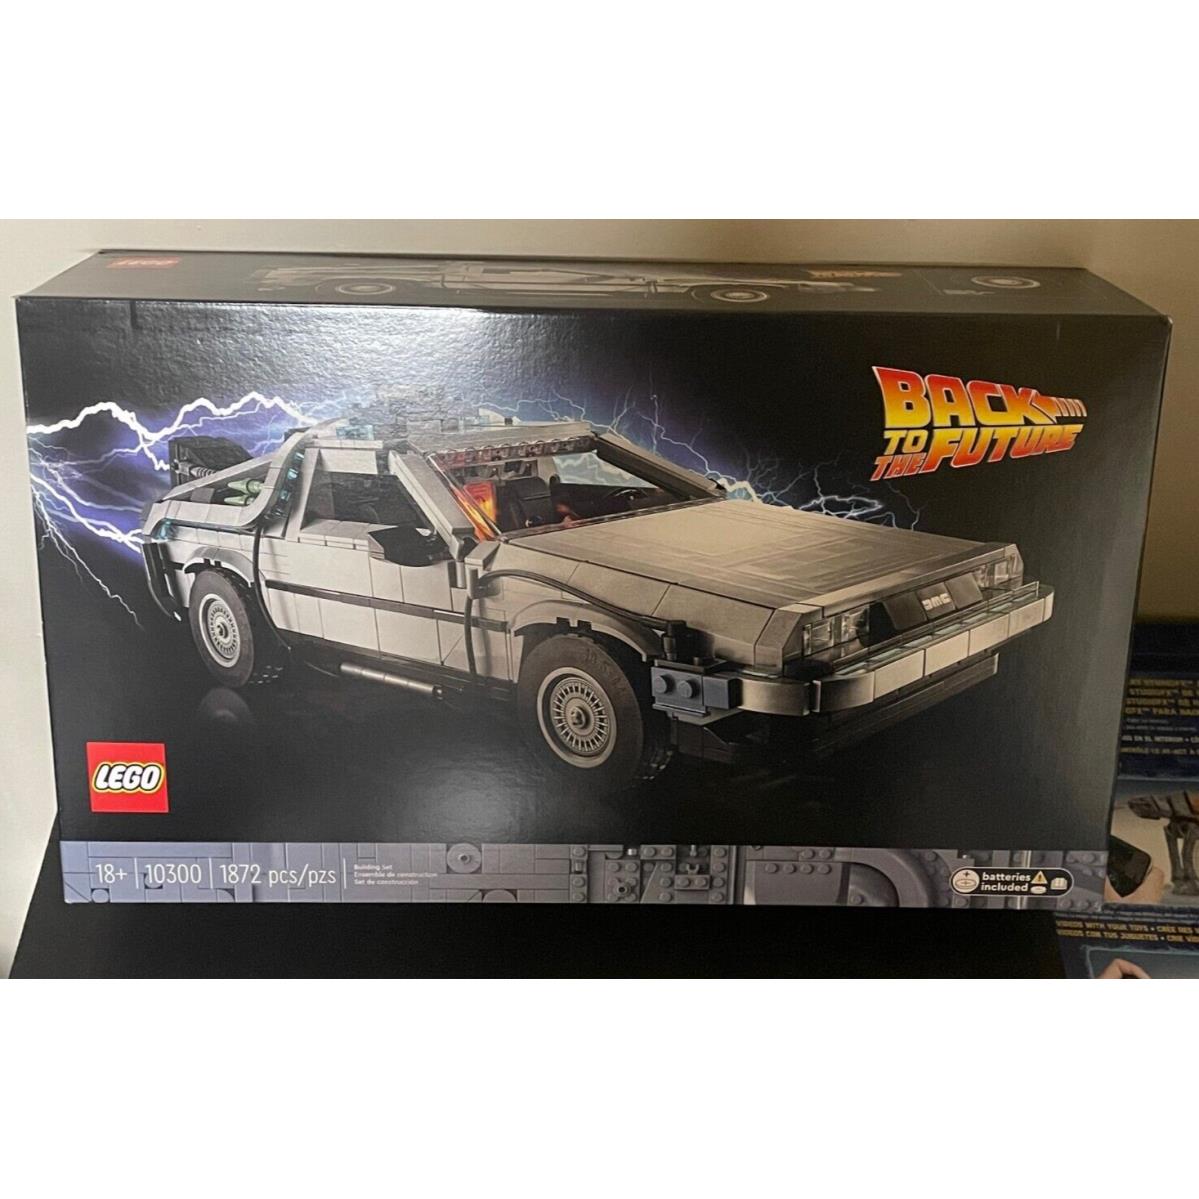 Lego 10300 Back TO The Future Deloran Time Machine Set AS Shown